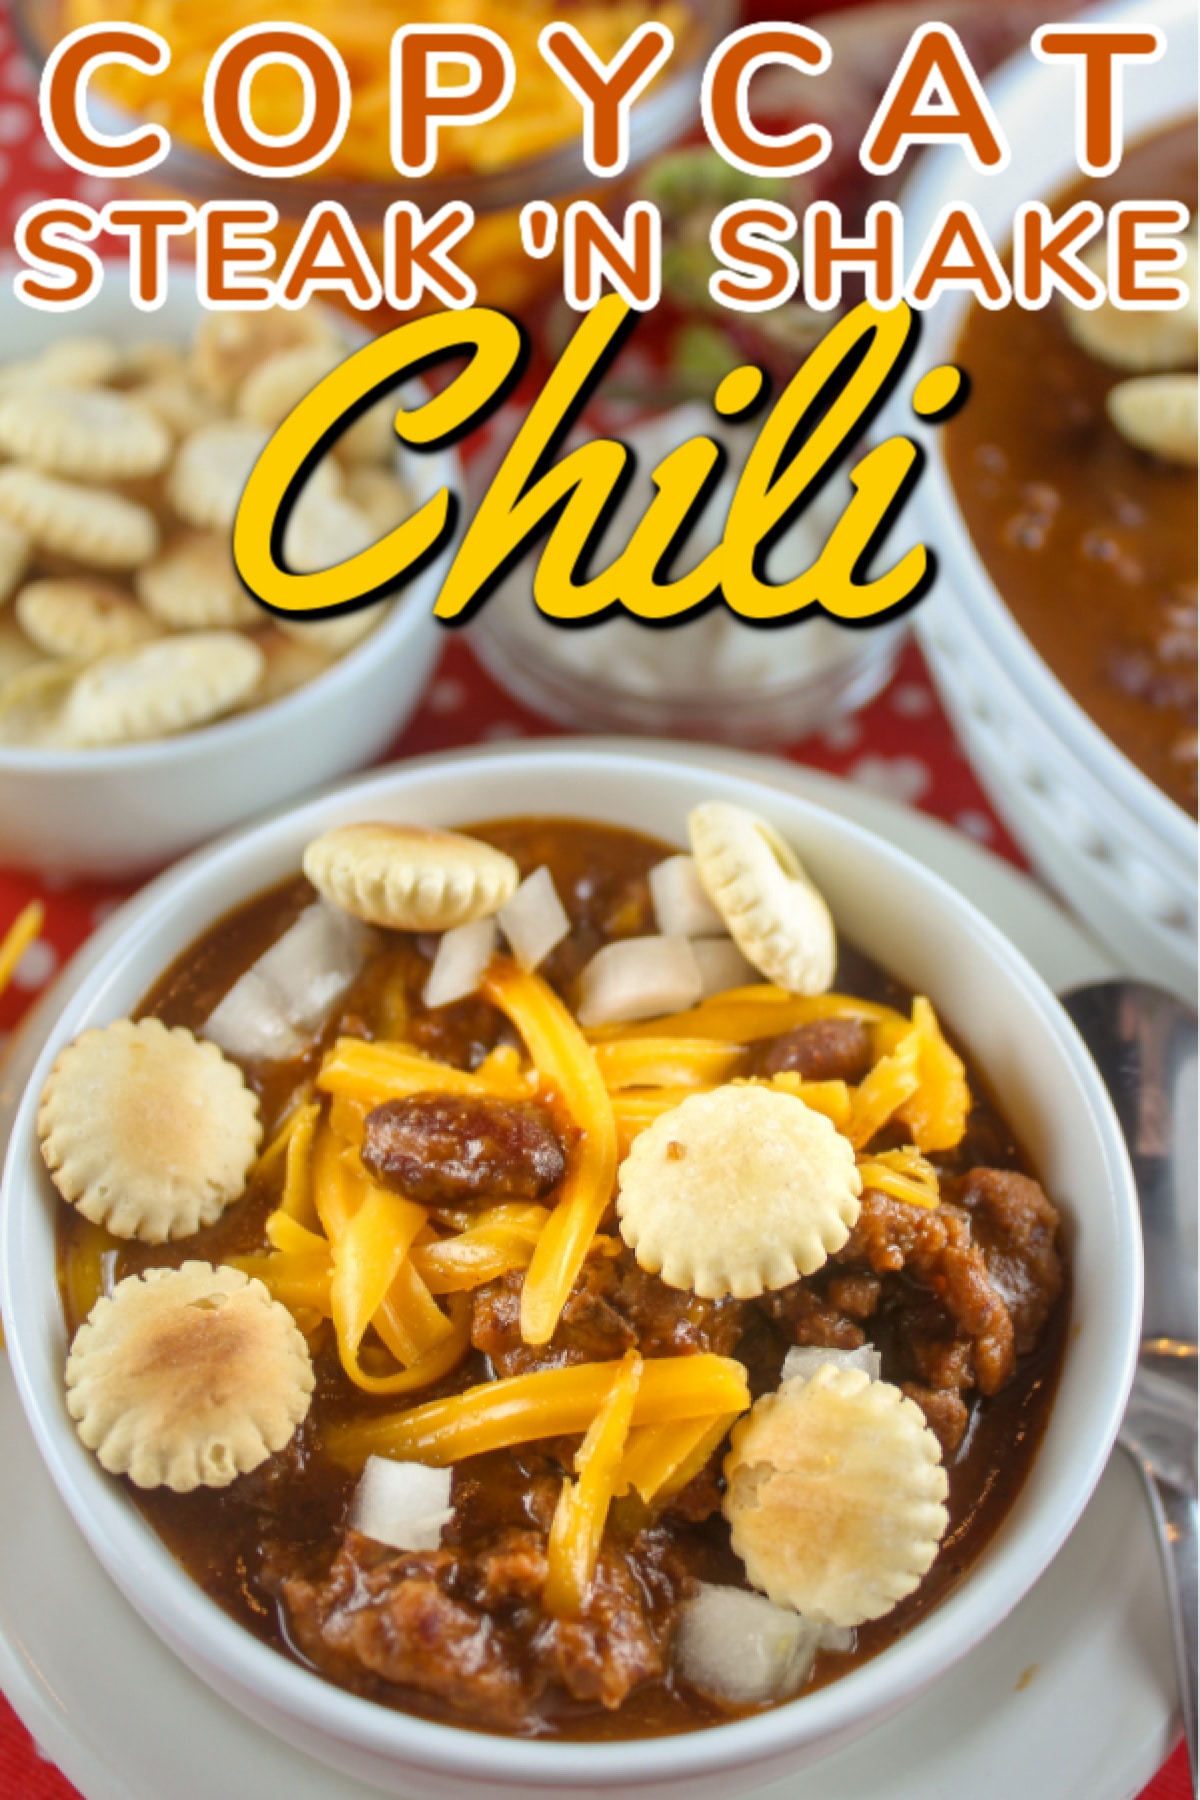 Steak 'N Shake chili is my all-time favorite restaurant chili! It's got a really specific THICK texture - almost a sauce - that is unlike any other. And - after three tries - I FIGURED IT OUT!! I finally made a copycat recipe that is identical to Steak 'N Shake chili! via @foodhussy